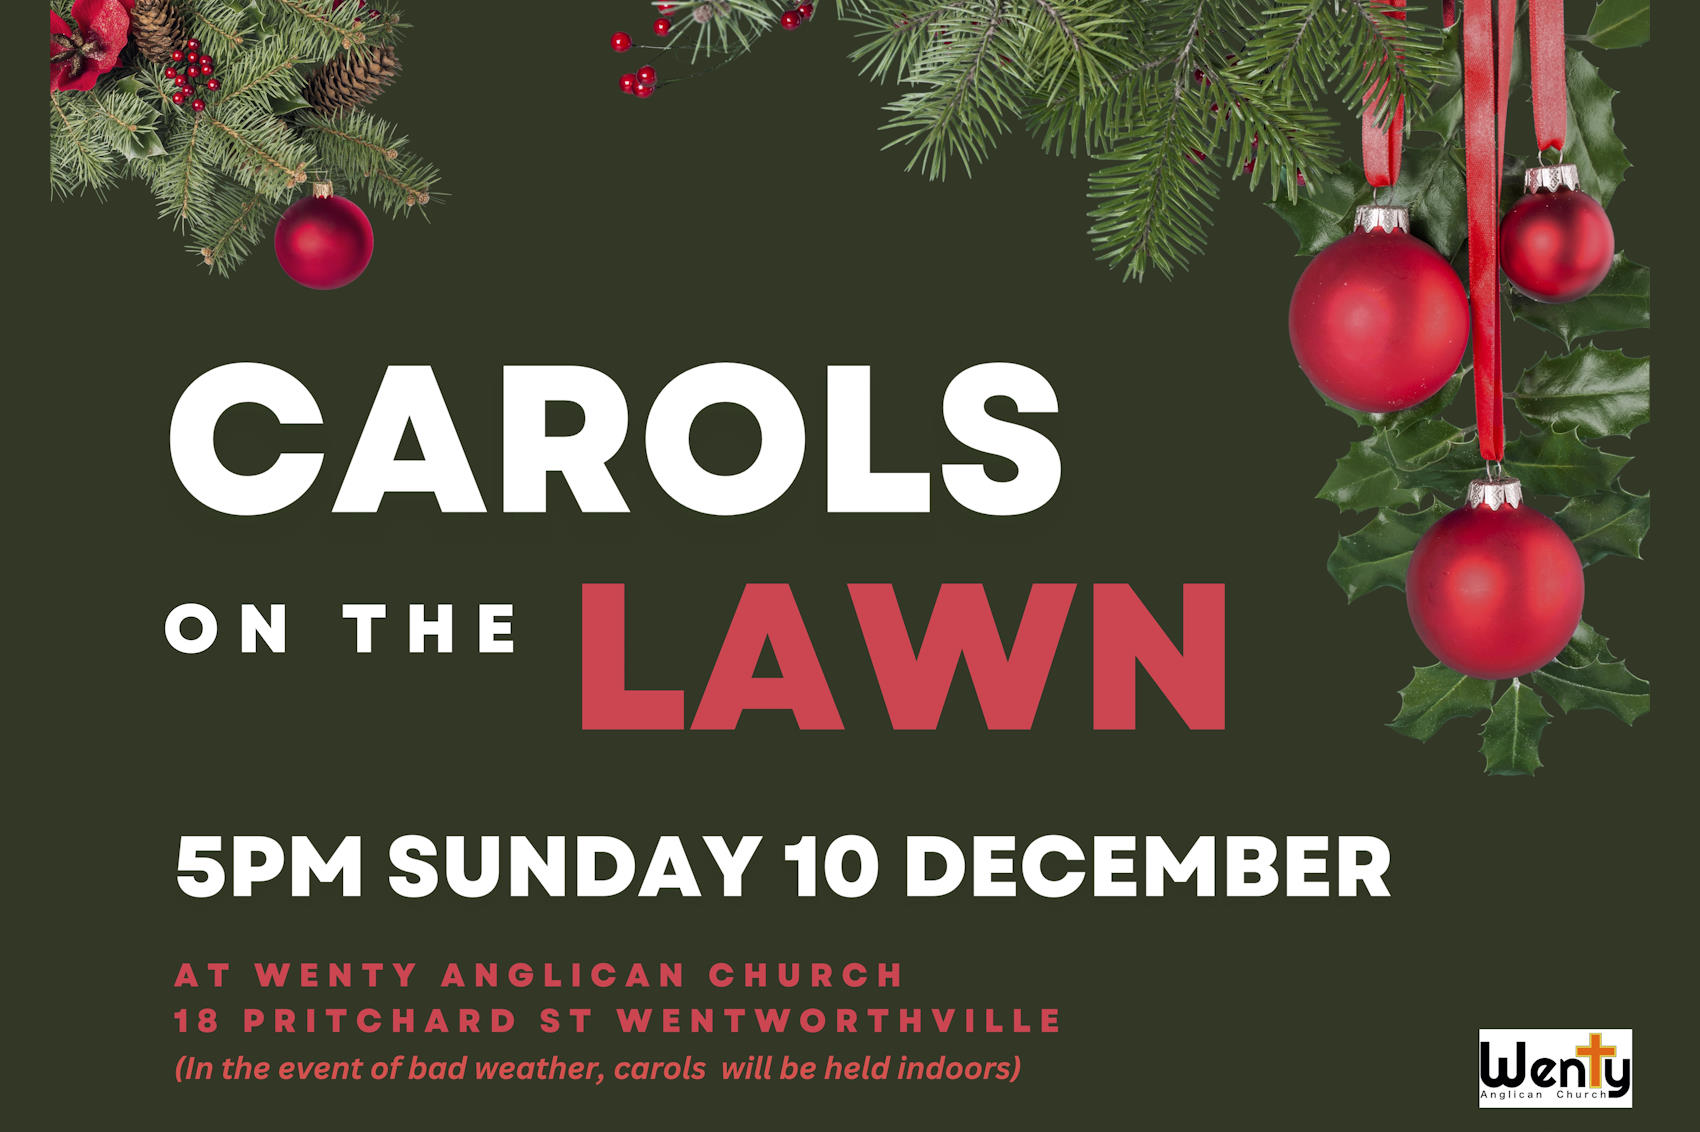 Carols on the Lawn. 5pm Sunday 10th December. At Wenty Anglican Church, 18 Pritchard St Wentworthville. (In the event of bad weather, carols will be held indoors).